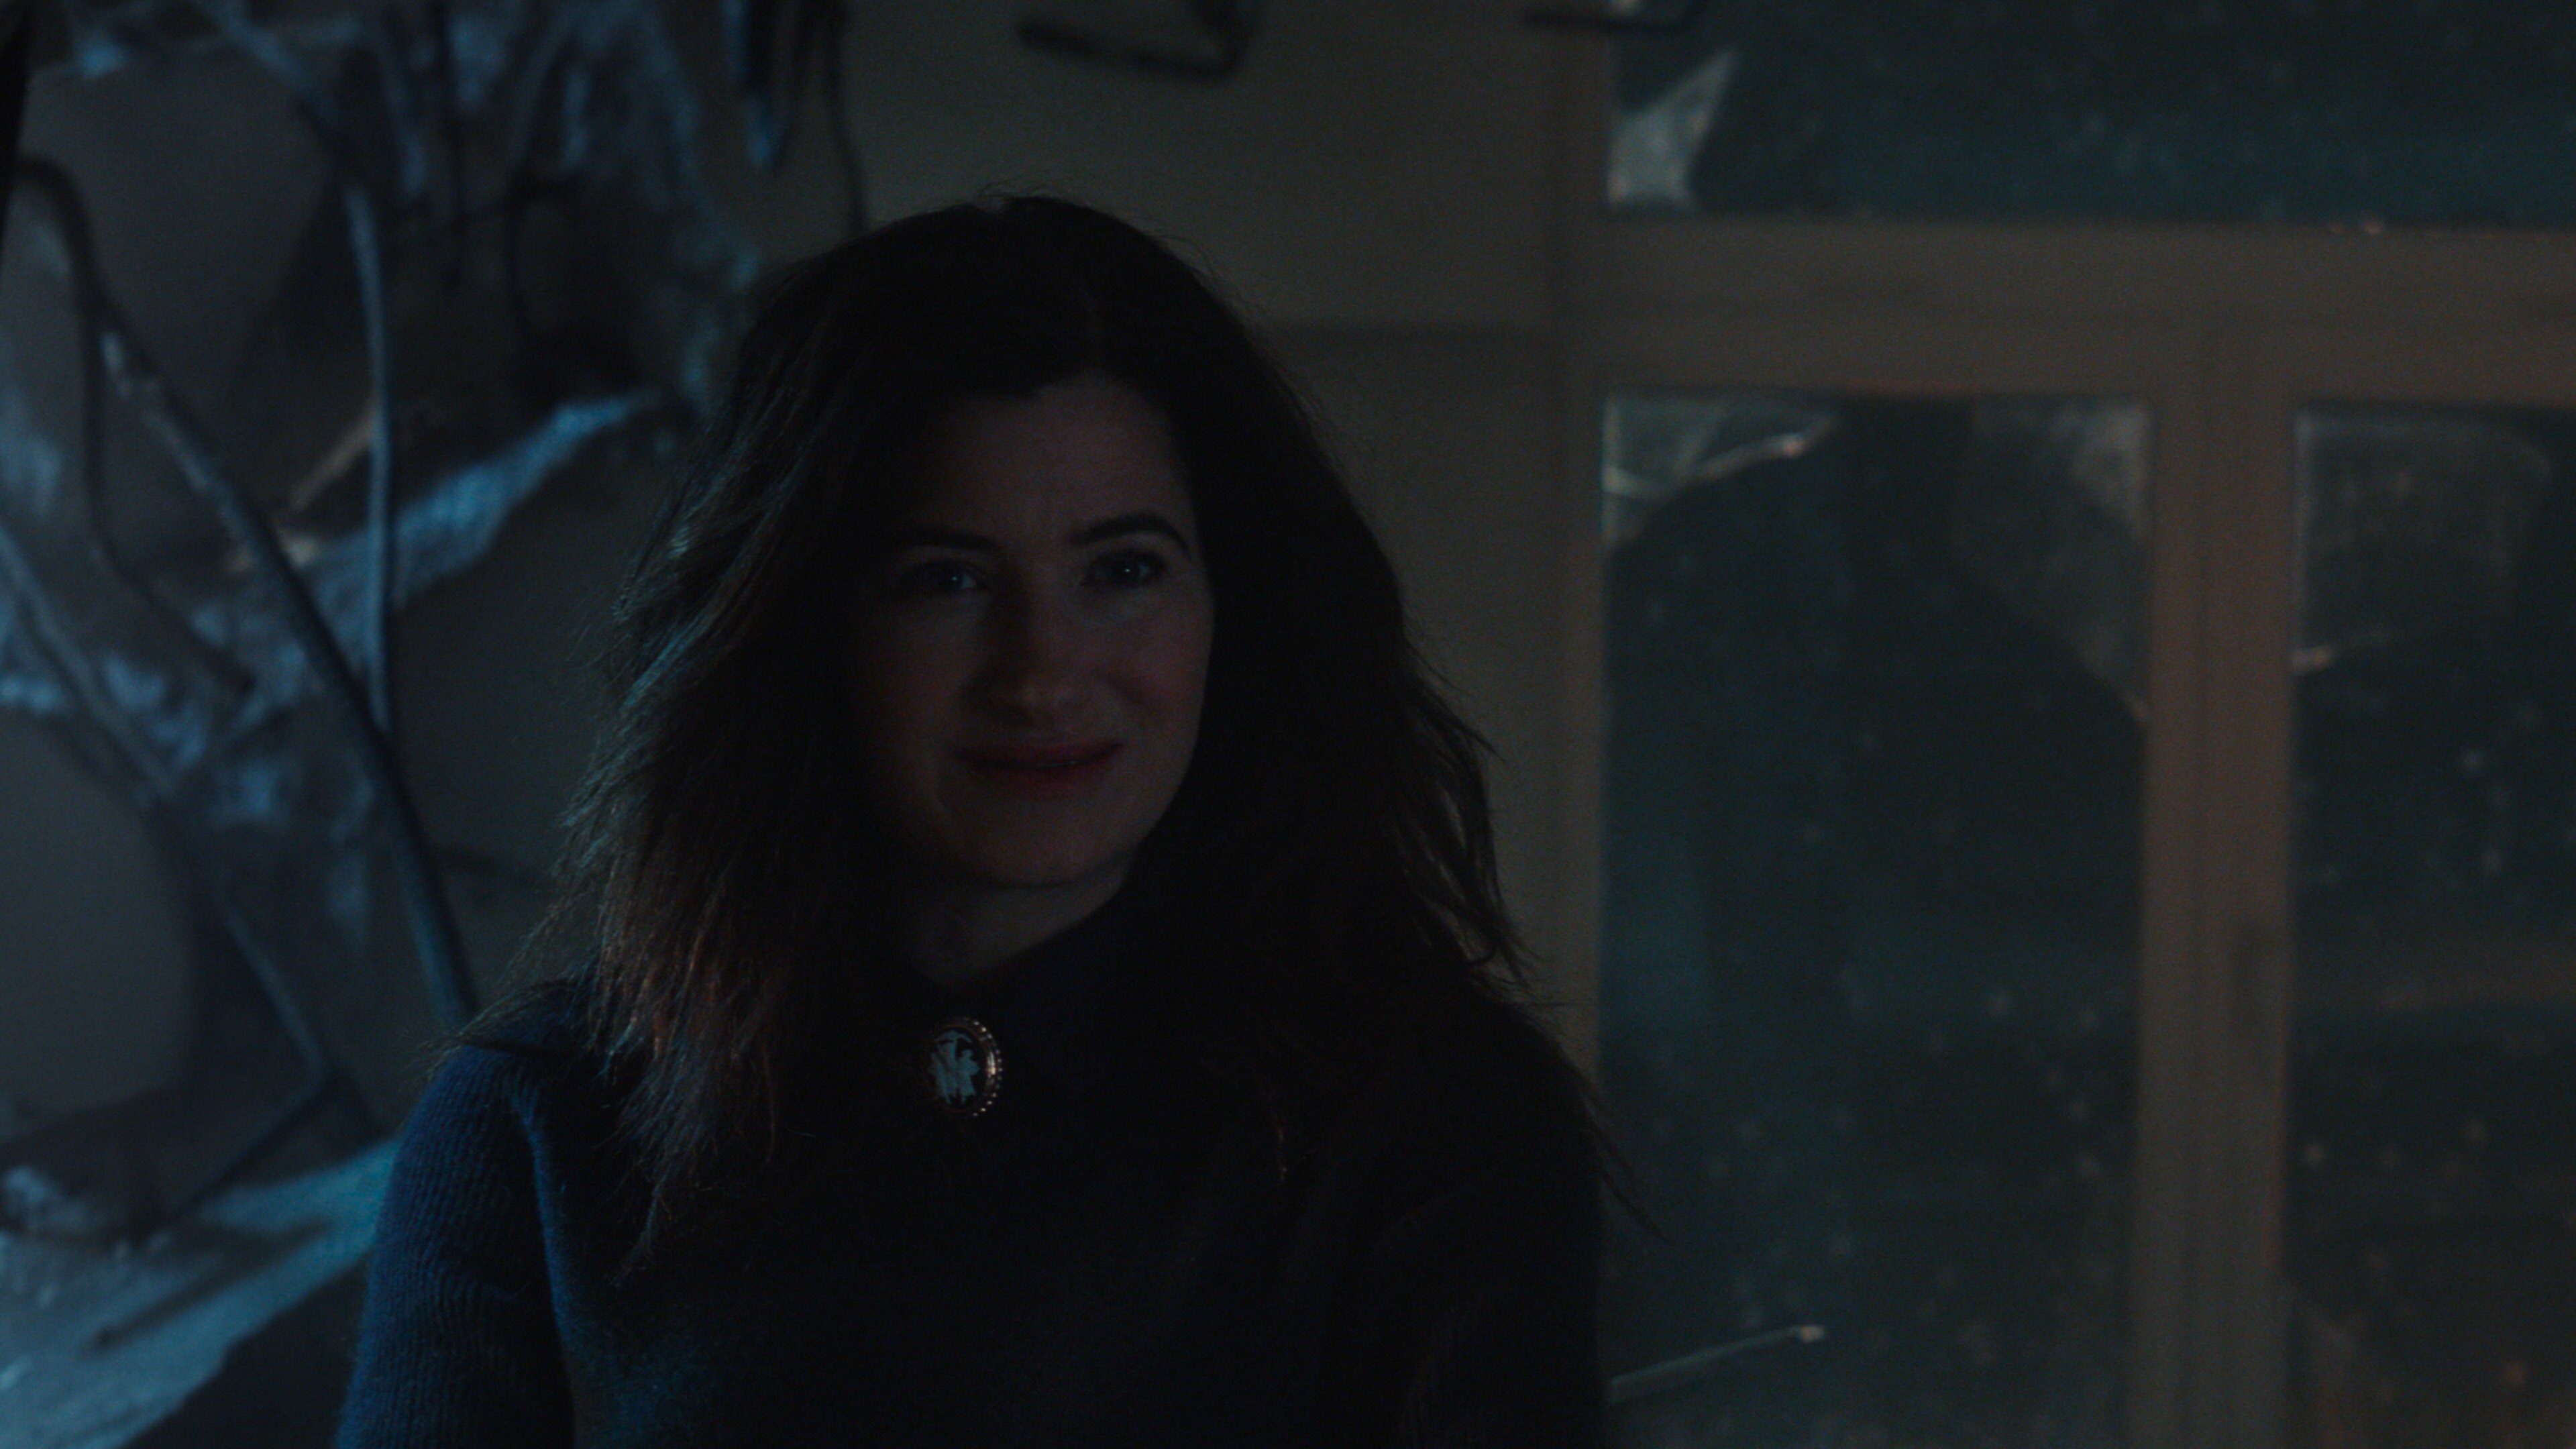 Kathryn Hahn as Agatha Harkness in Marvel Studios' WANDAVISION exclusively on Disney+. Photo courtesy of Marvel Studios. ©Marvel Studios 2021. All Rights Reserved.